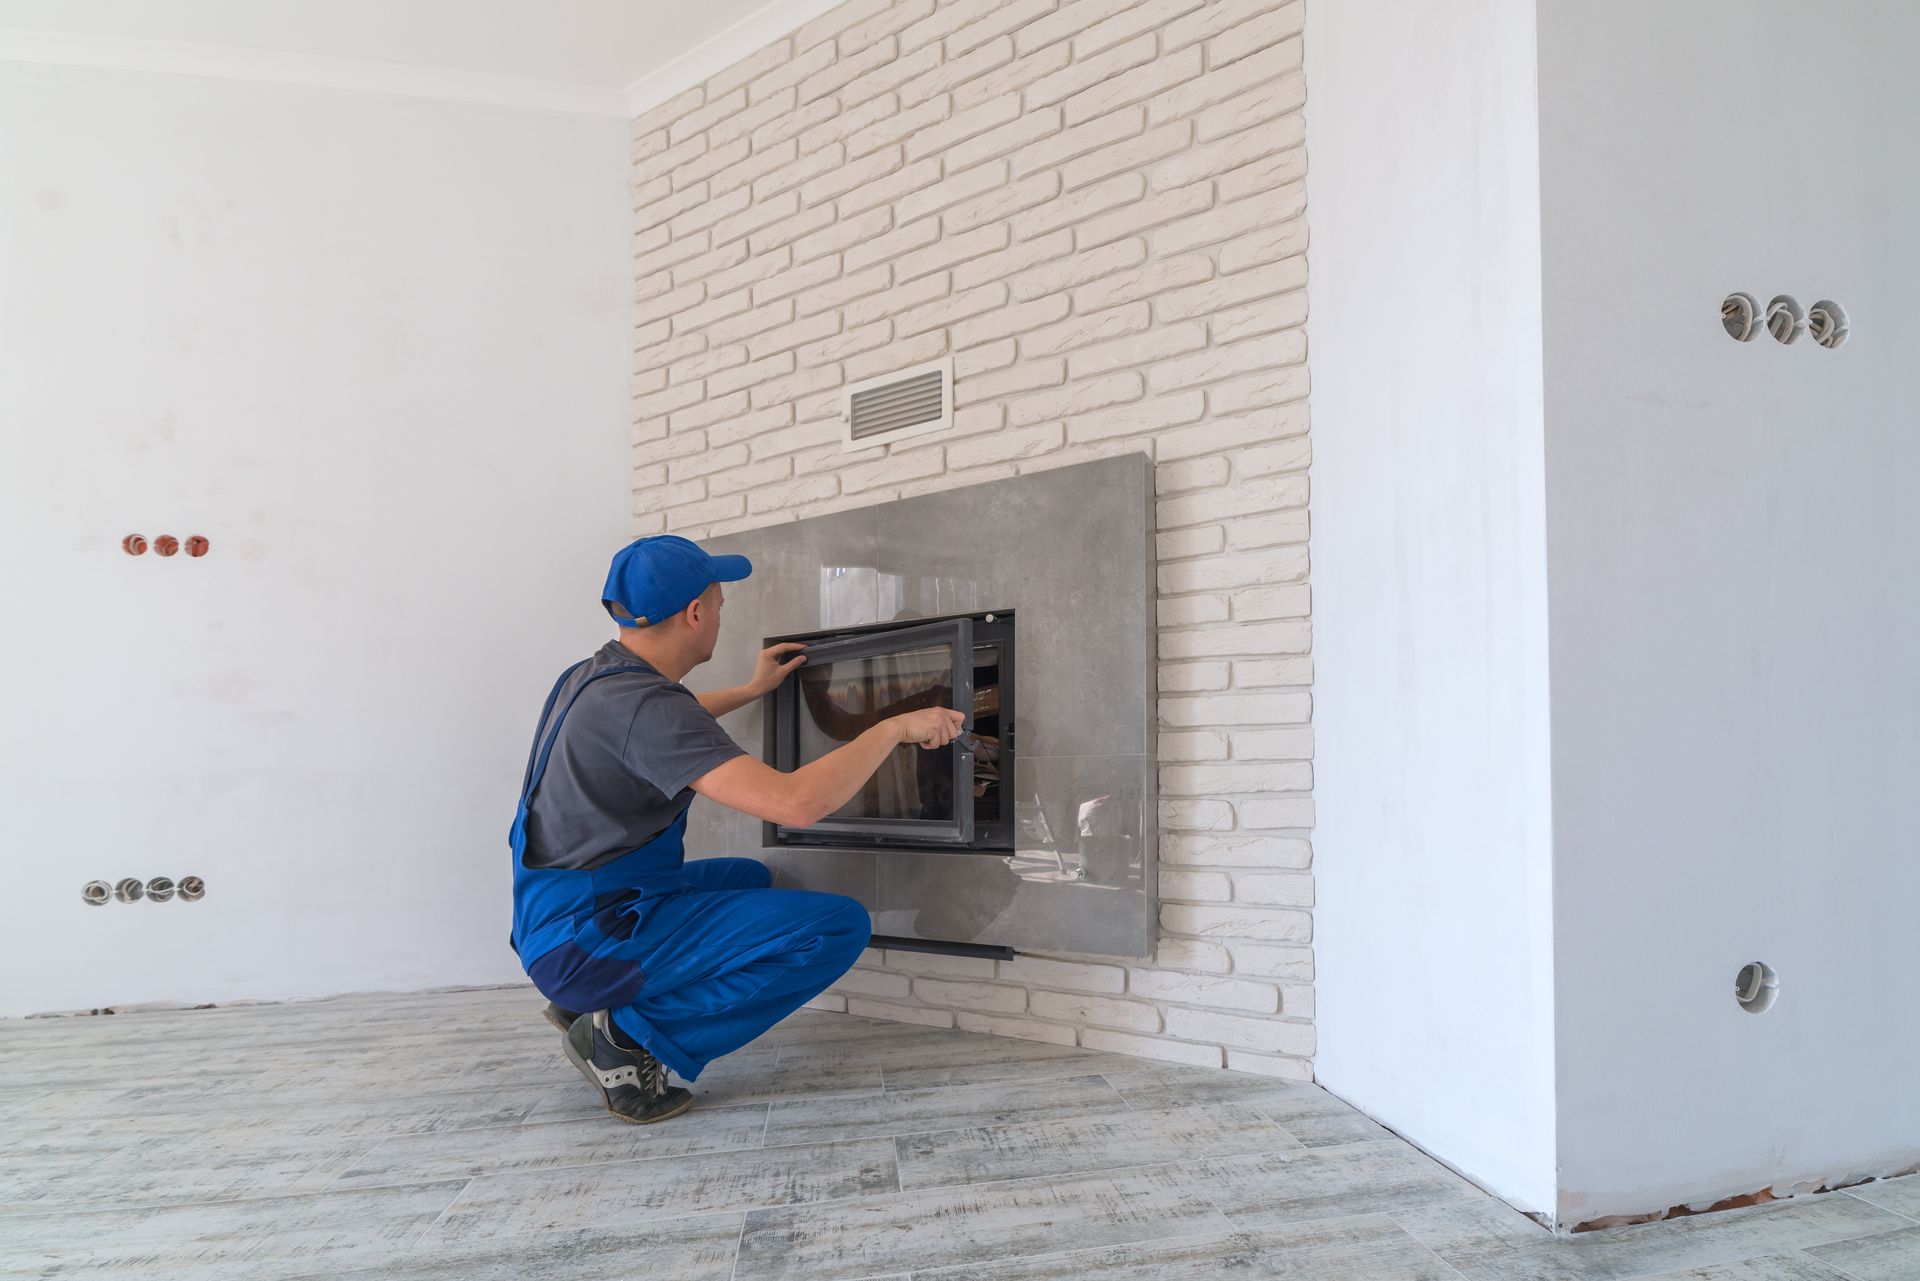 A man is installing a fireplace in a living room.